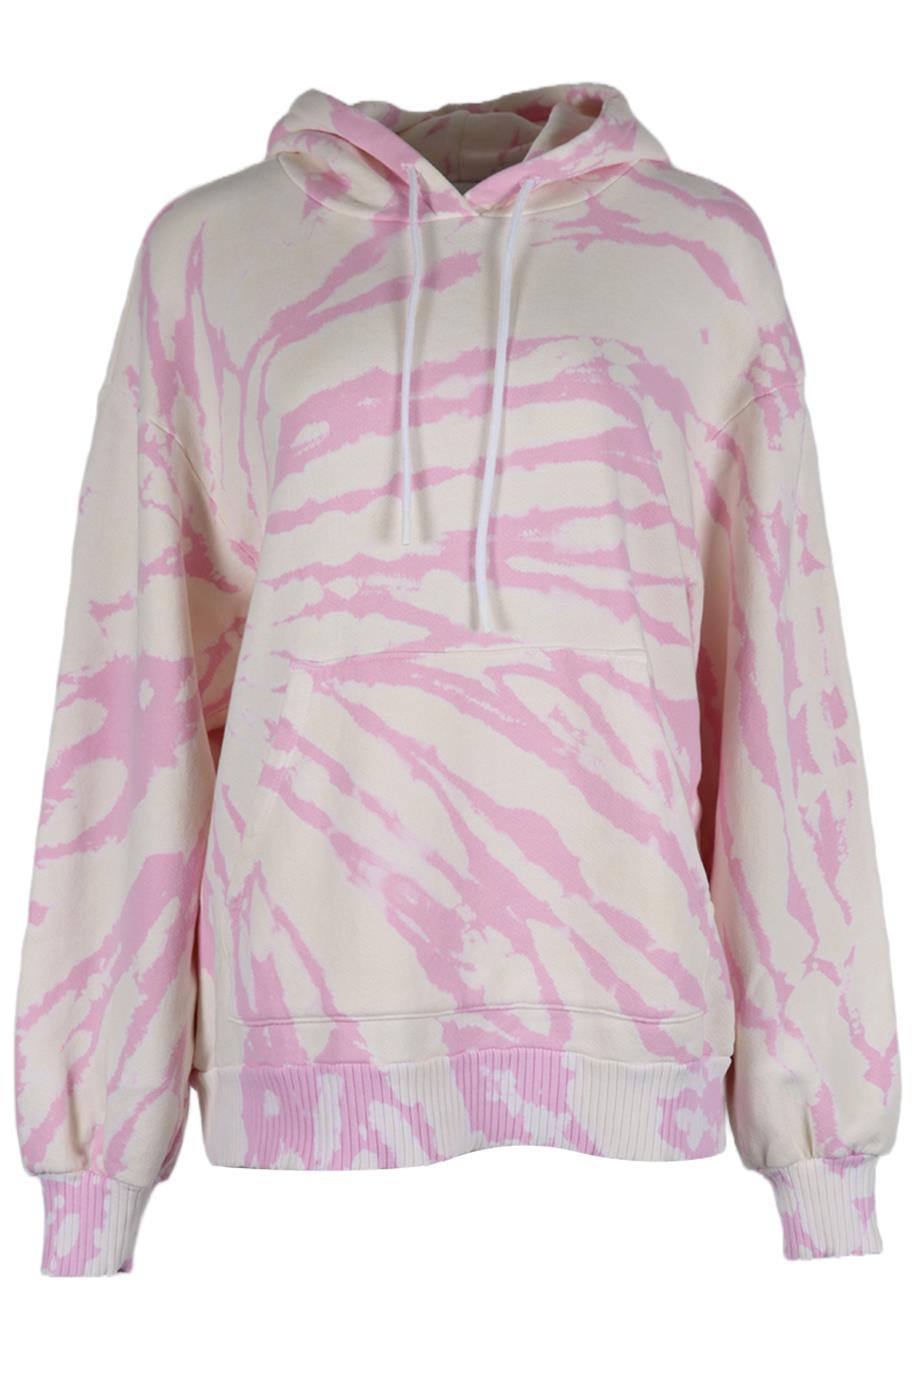 COTTON CITIZEN OVERSIZED TIE DYED COTTON JERSEY HOODIE LARGE